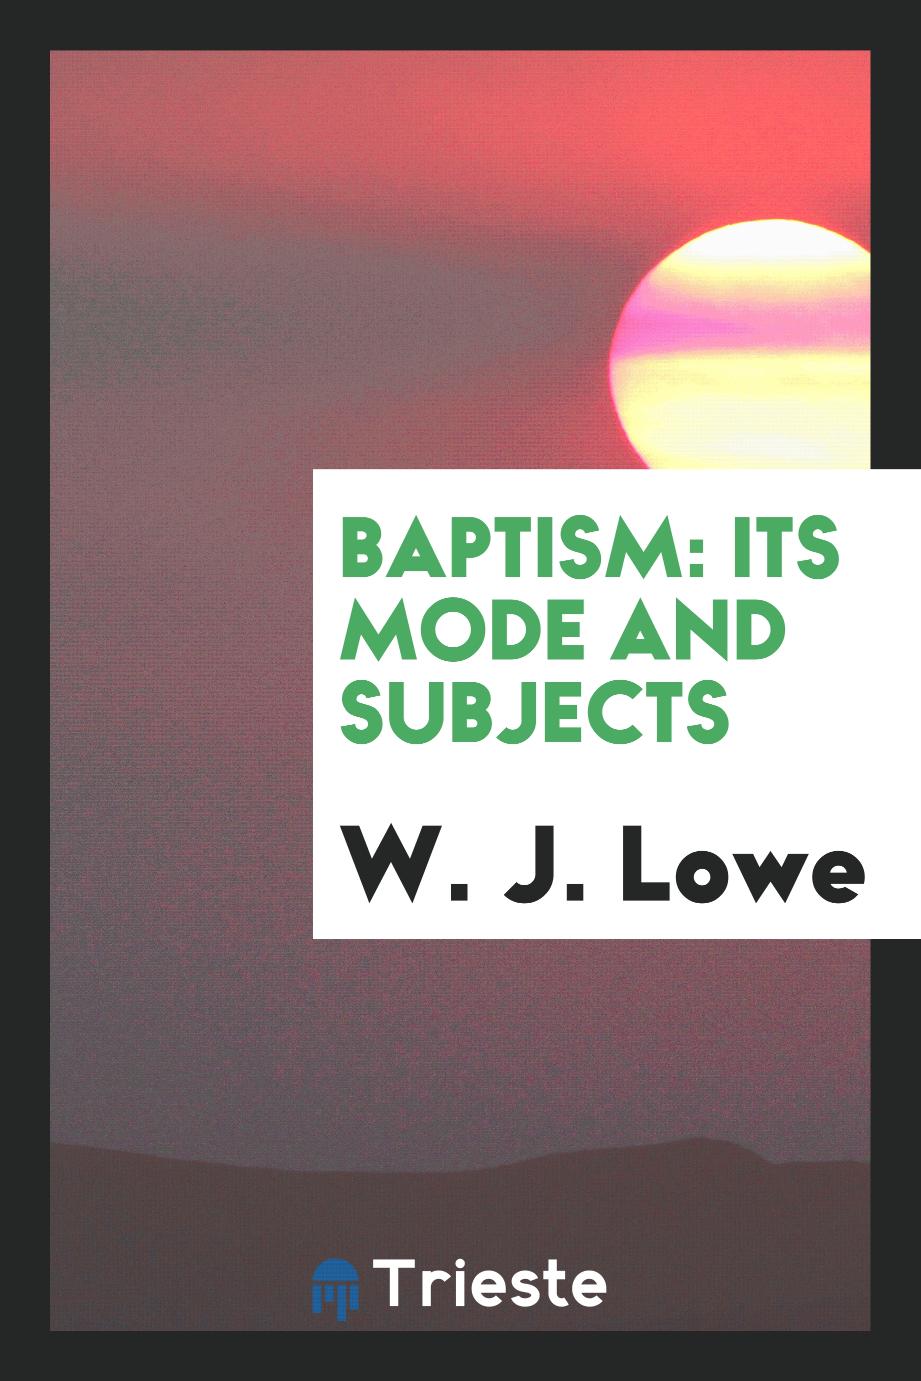 Baptism: its mode and subjects